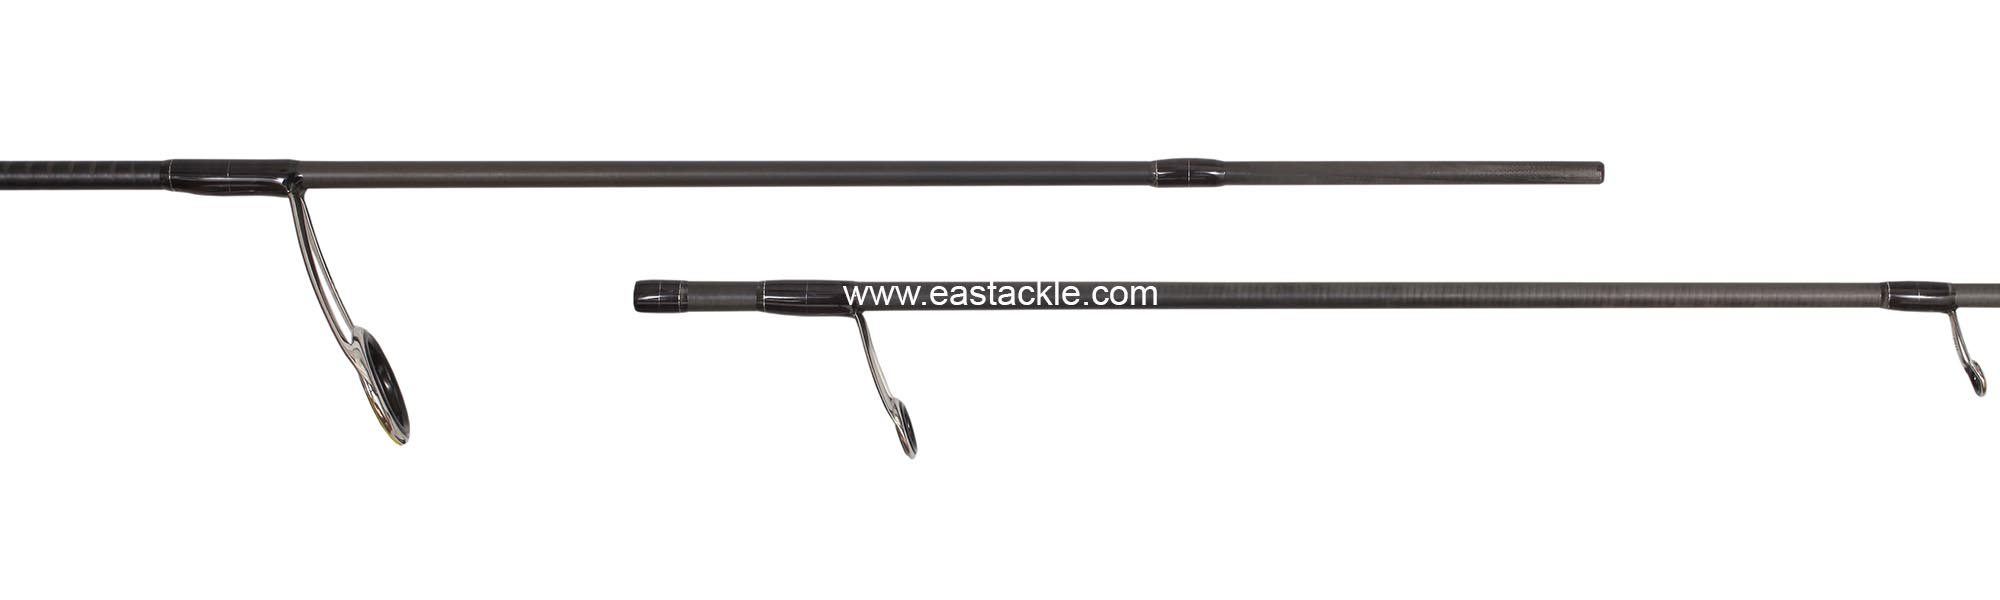 Storm - Shore-X - SXS862MH - Spinning Rod - Joint Section (Side View) | Eastackle